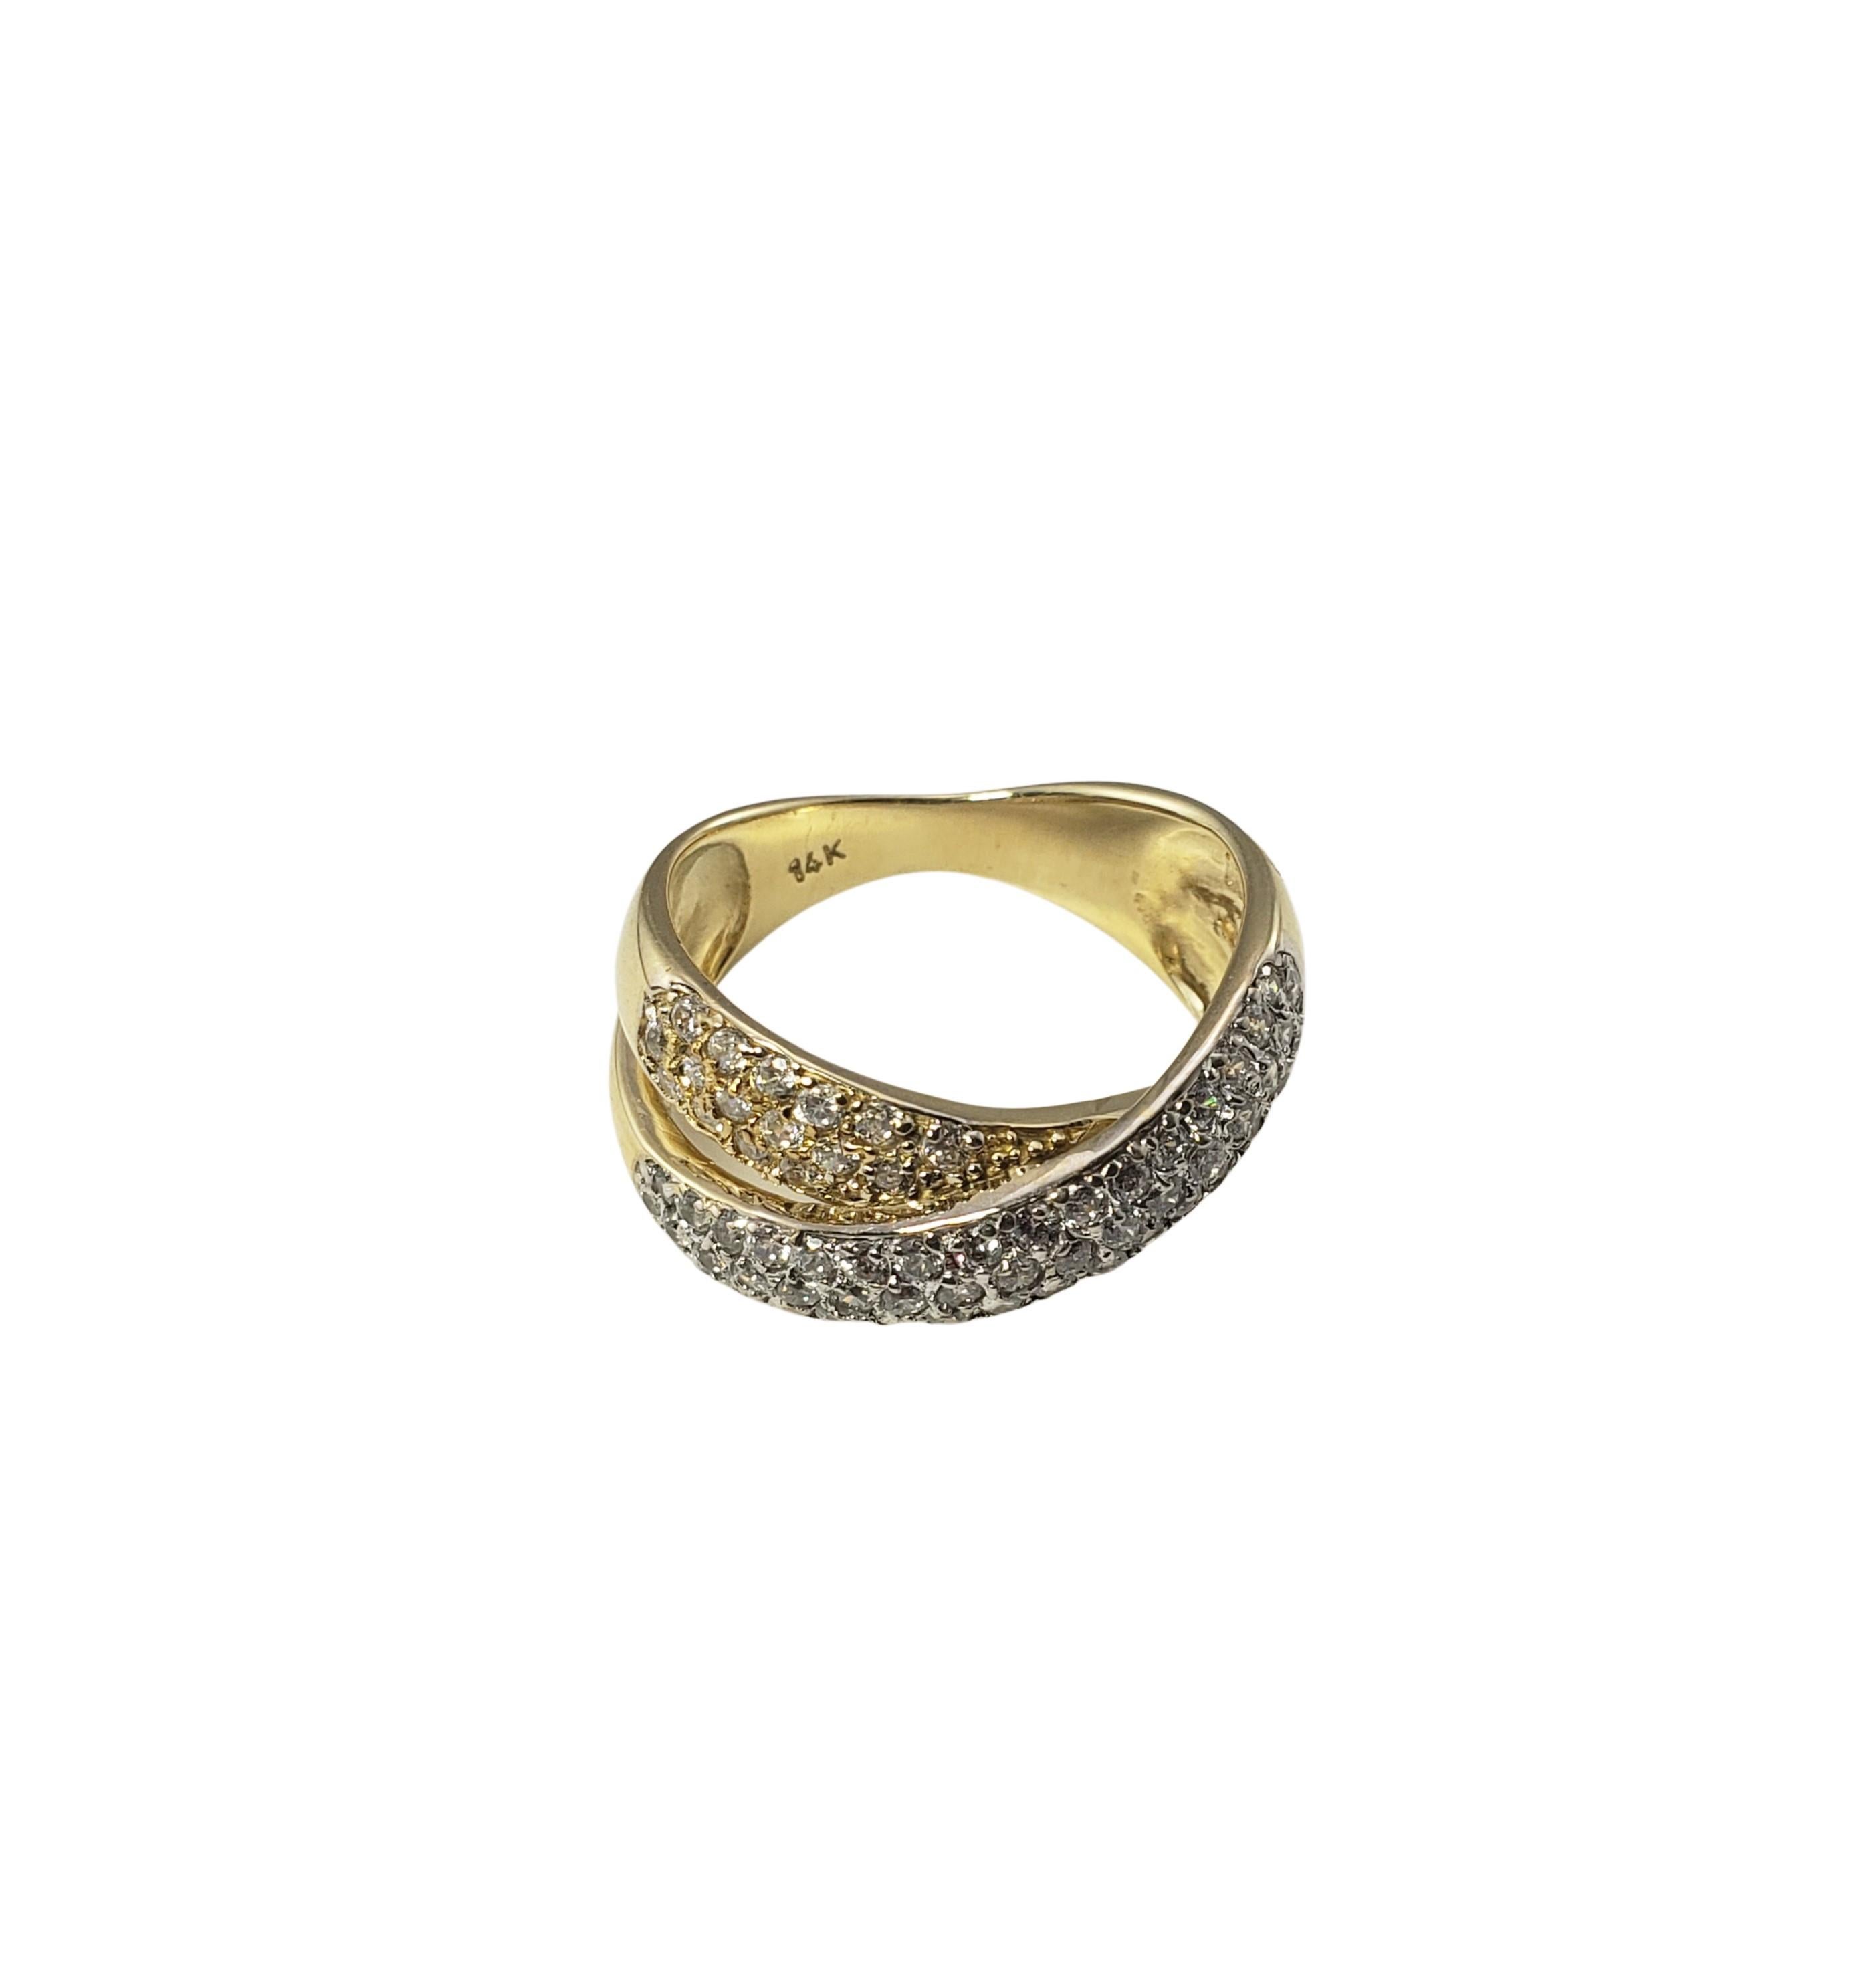 Brilliant Cut 14 Karat Yellow and White Gold Diamond Ring For Sale